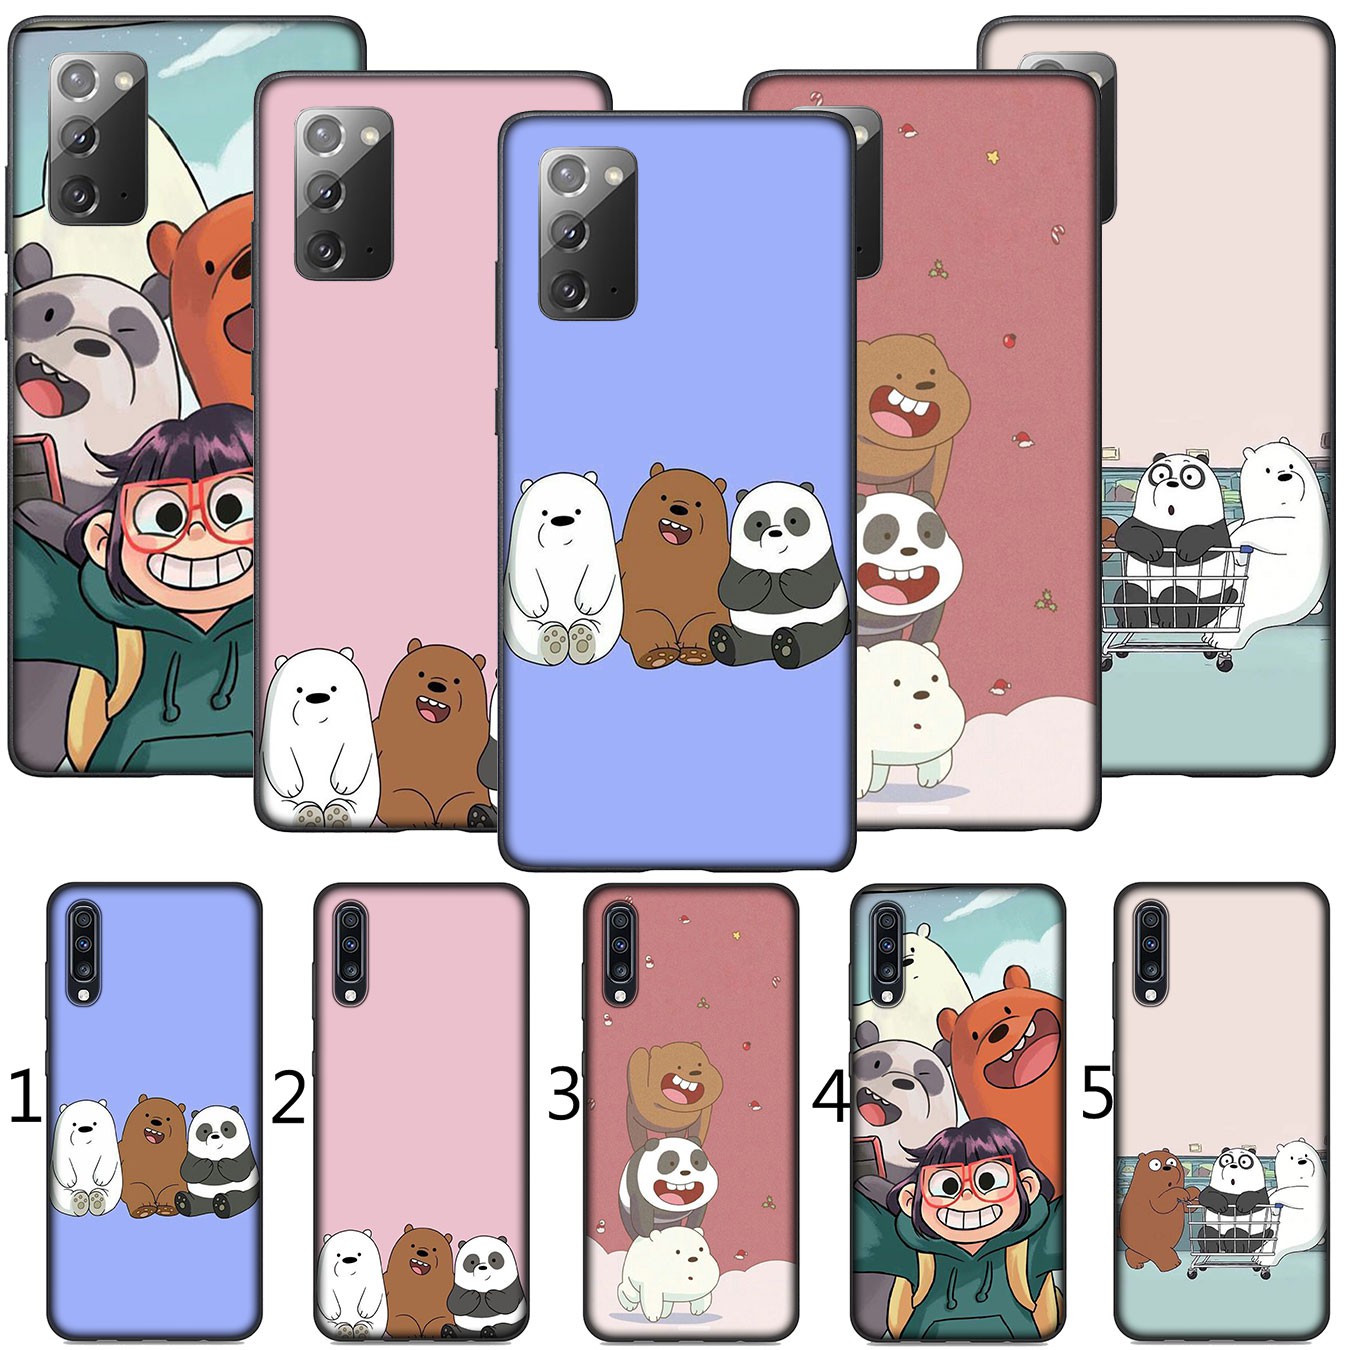 Samsung Galaxy A02S J2 J4 J5 J6 Plus J7 Prime A02 M02 j6+ A42 + Casing Soft Silicone Phone Case H75 We Bare Bears Cover